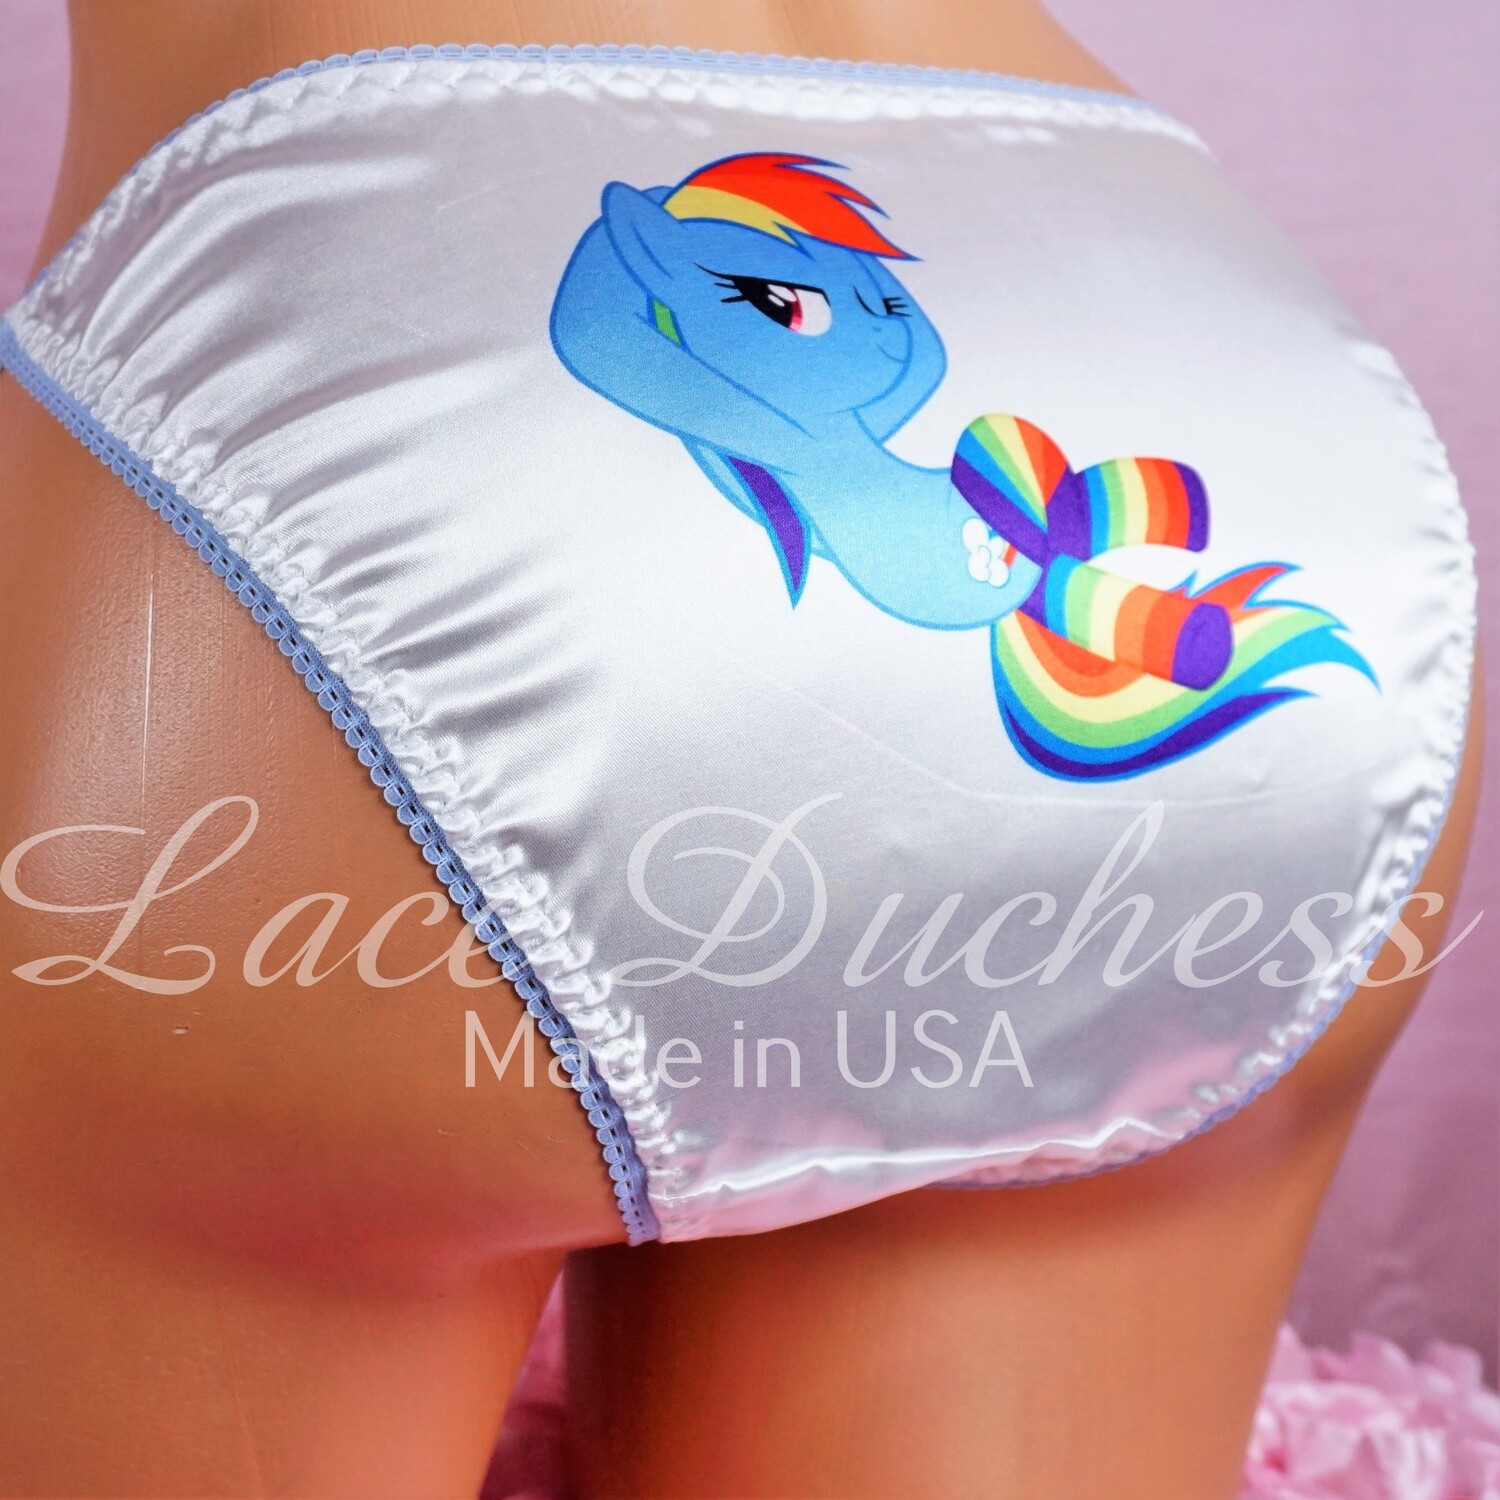 Lace Duchess Classic 80's cut Little Rainbow Pony Character movie print sissy satin wet look ladies or Mens panties sz 5 6 7 8